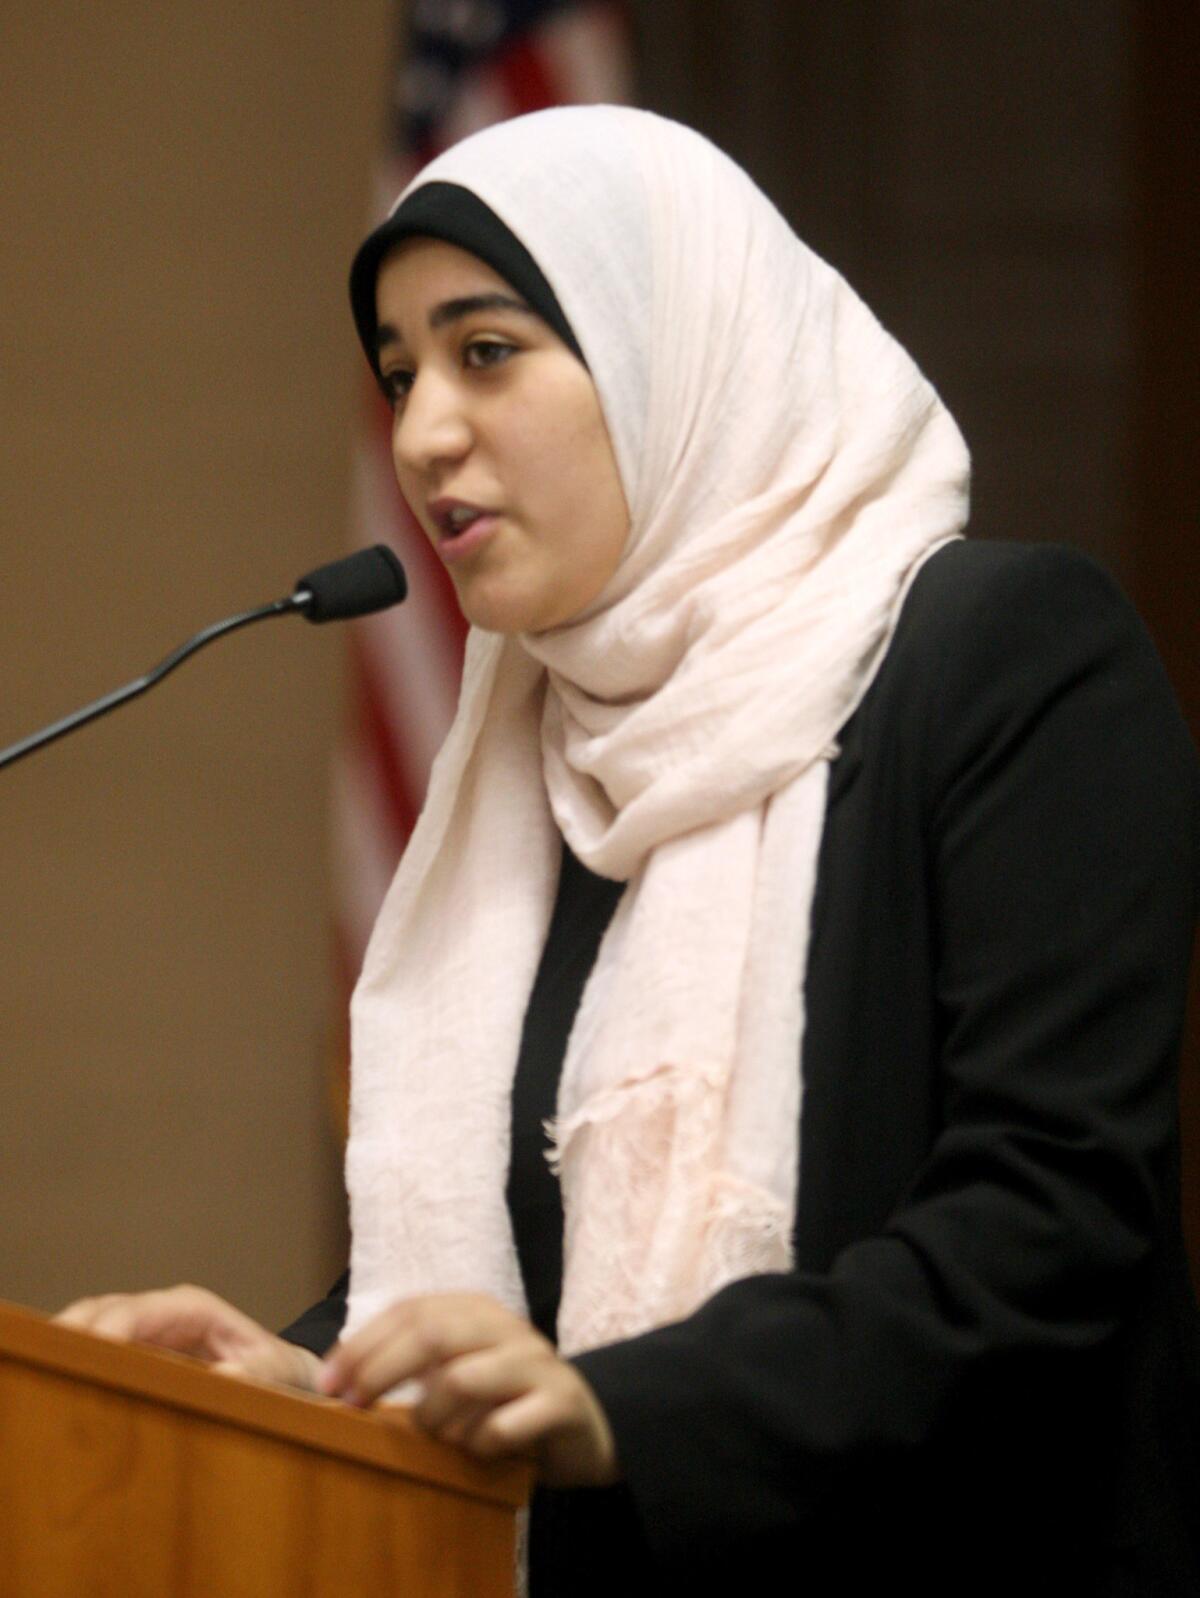 Fatimah Omar gives a spiritual reading from the Quran at the 53rd annual Glendale Mayor's Prayer Breakfast at the Glendale Civic Auditorium on Thursday, March 10, 2016.